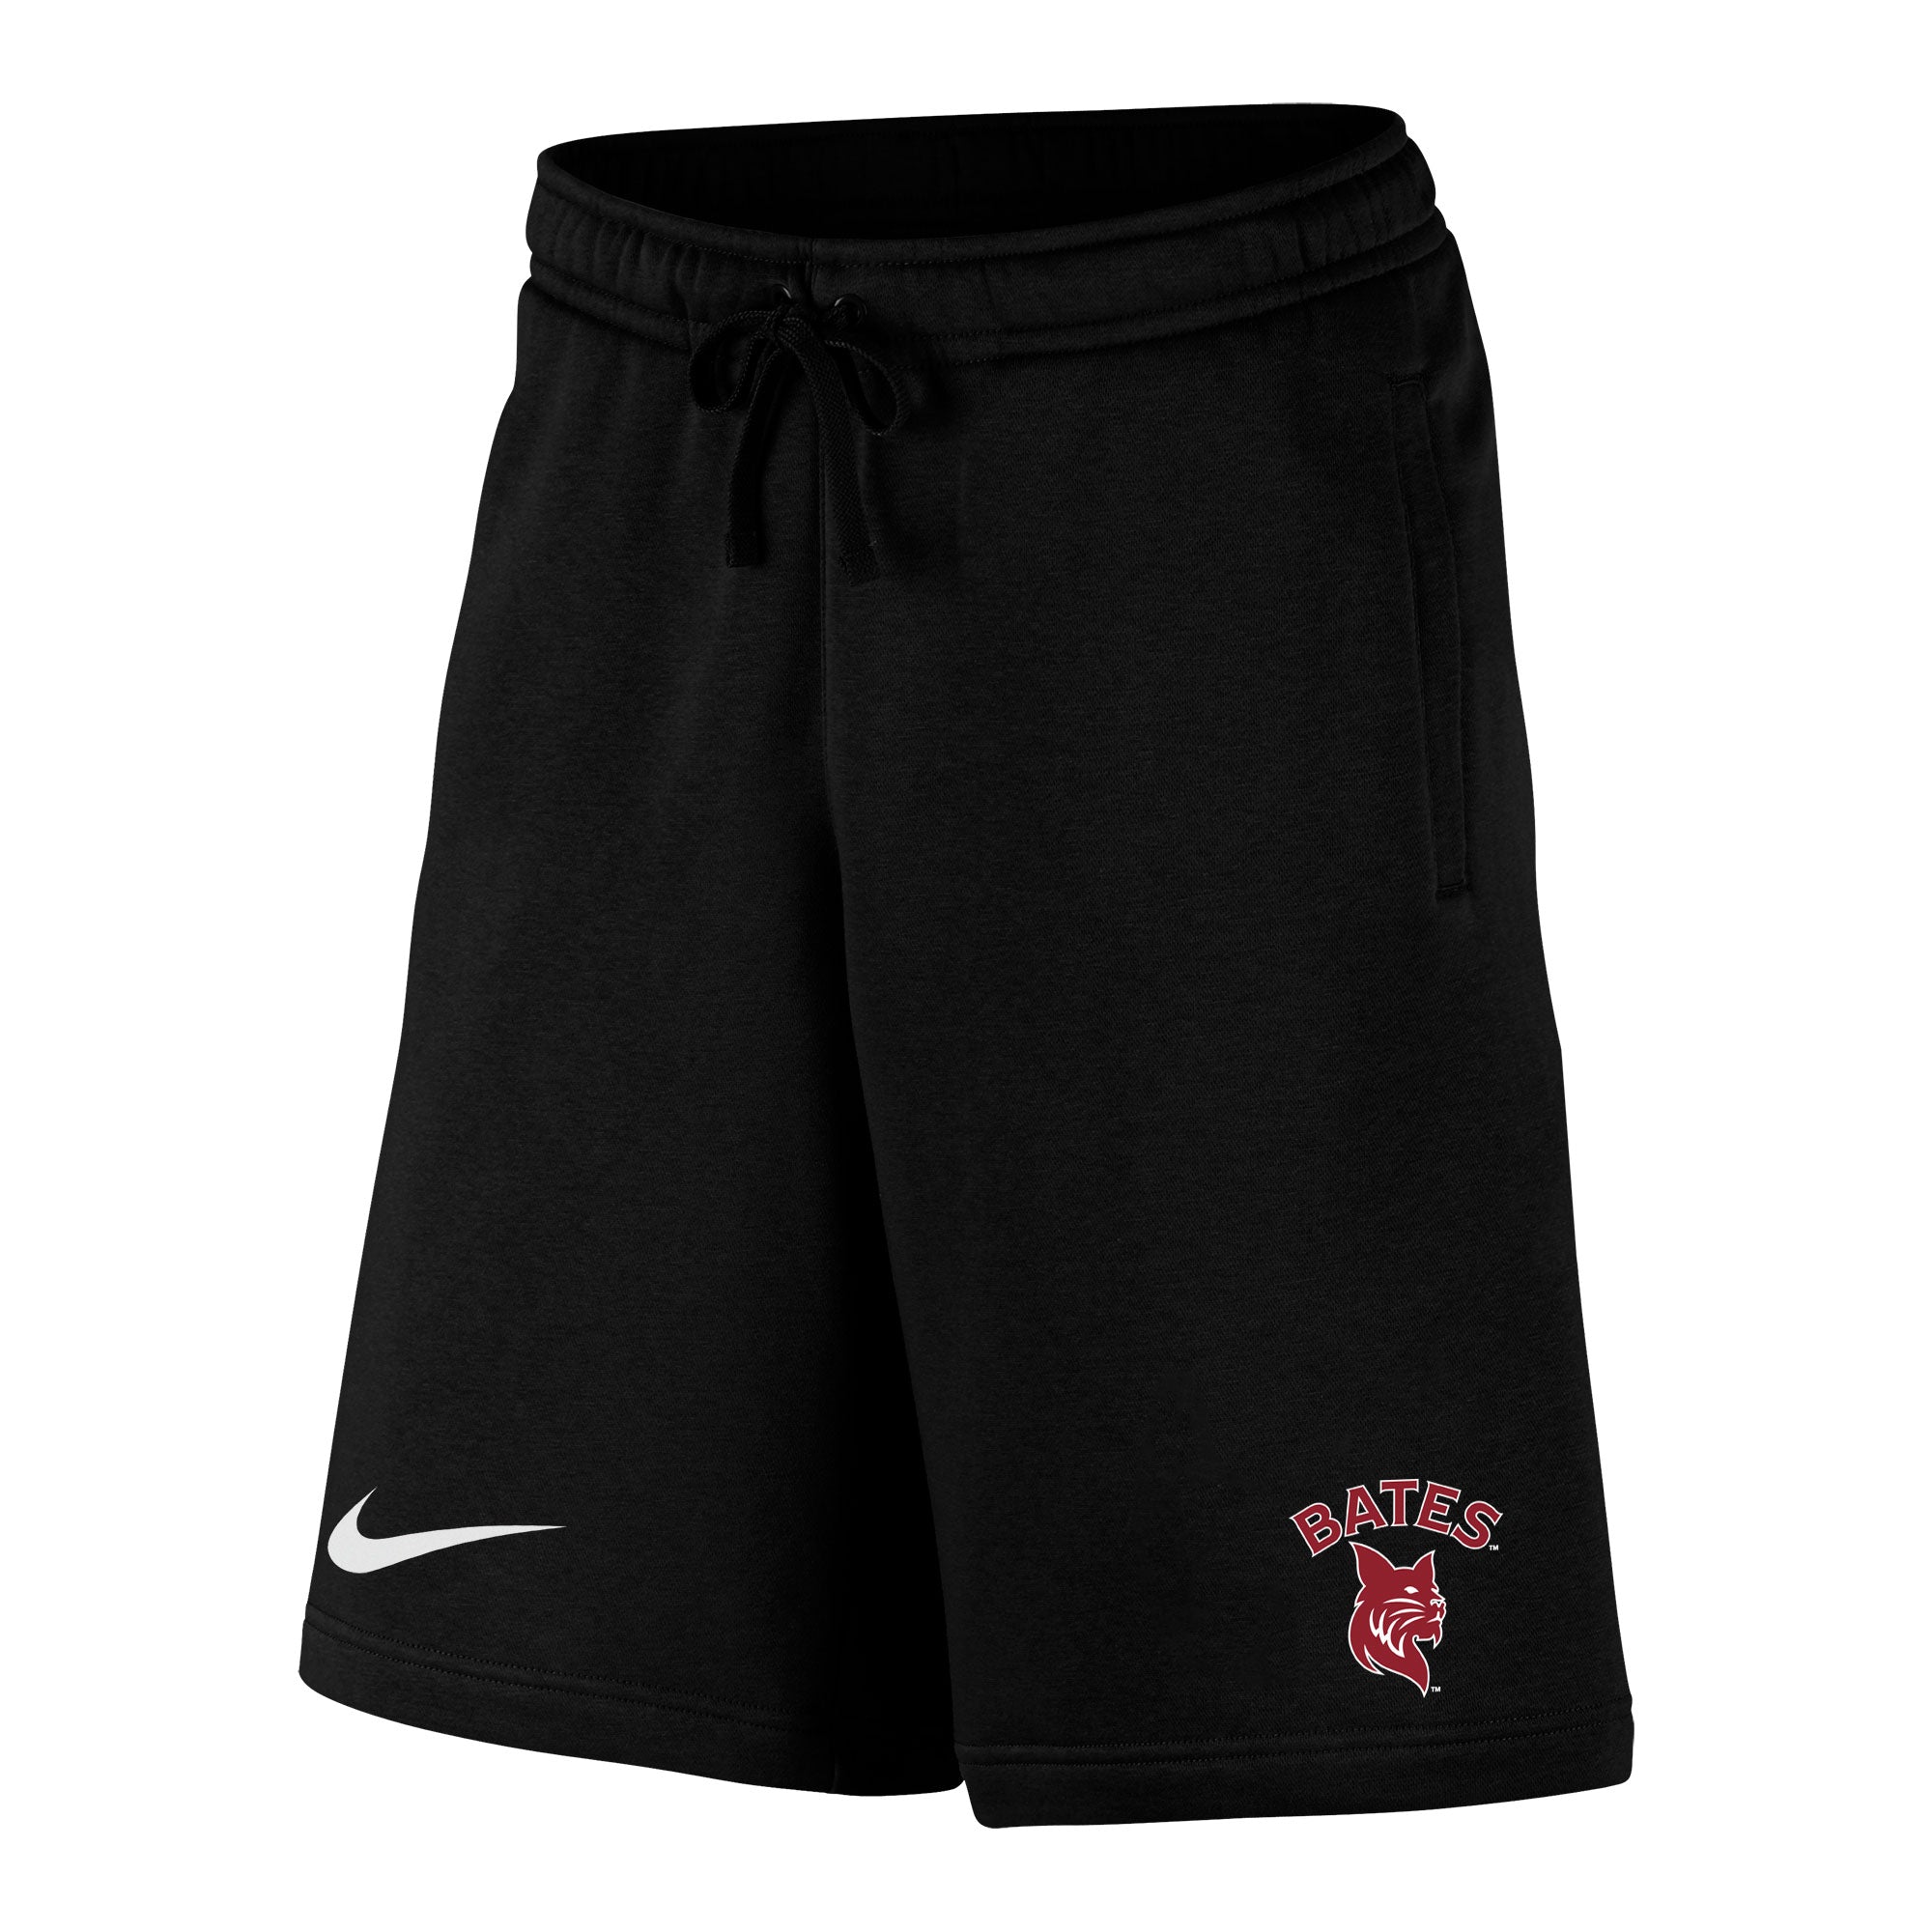 Nike Sweat Shorts for Men: Shop for Nike Active Apparel